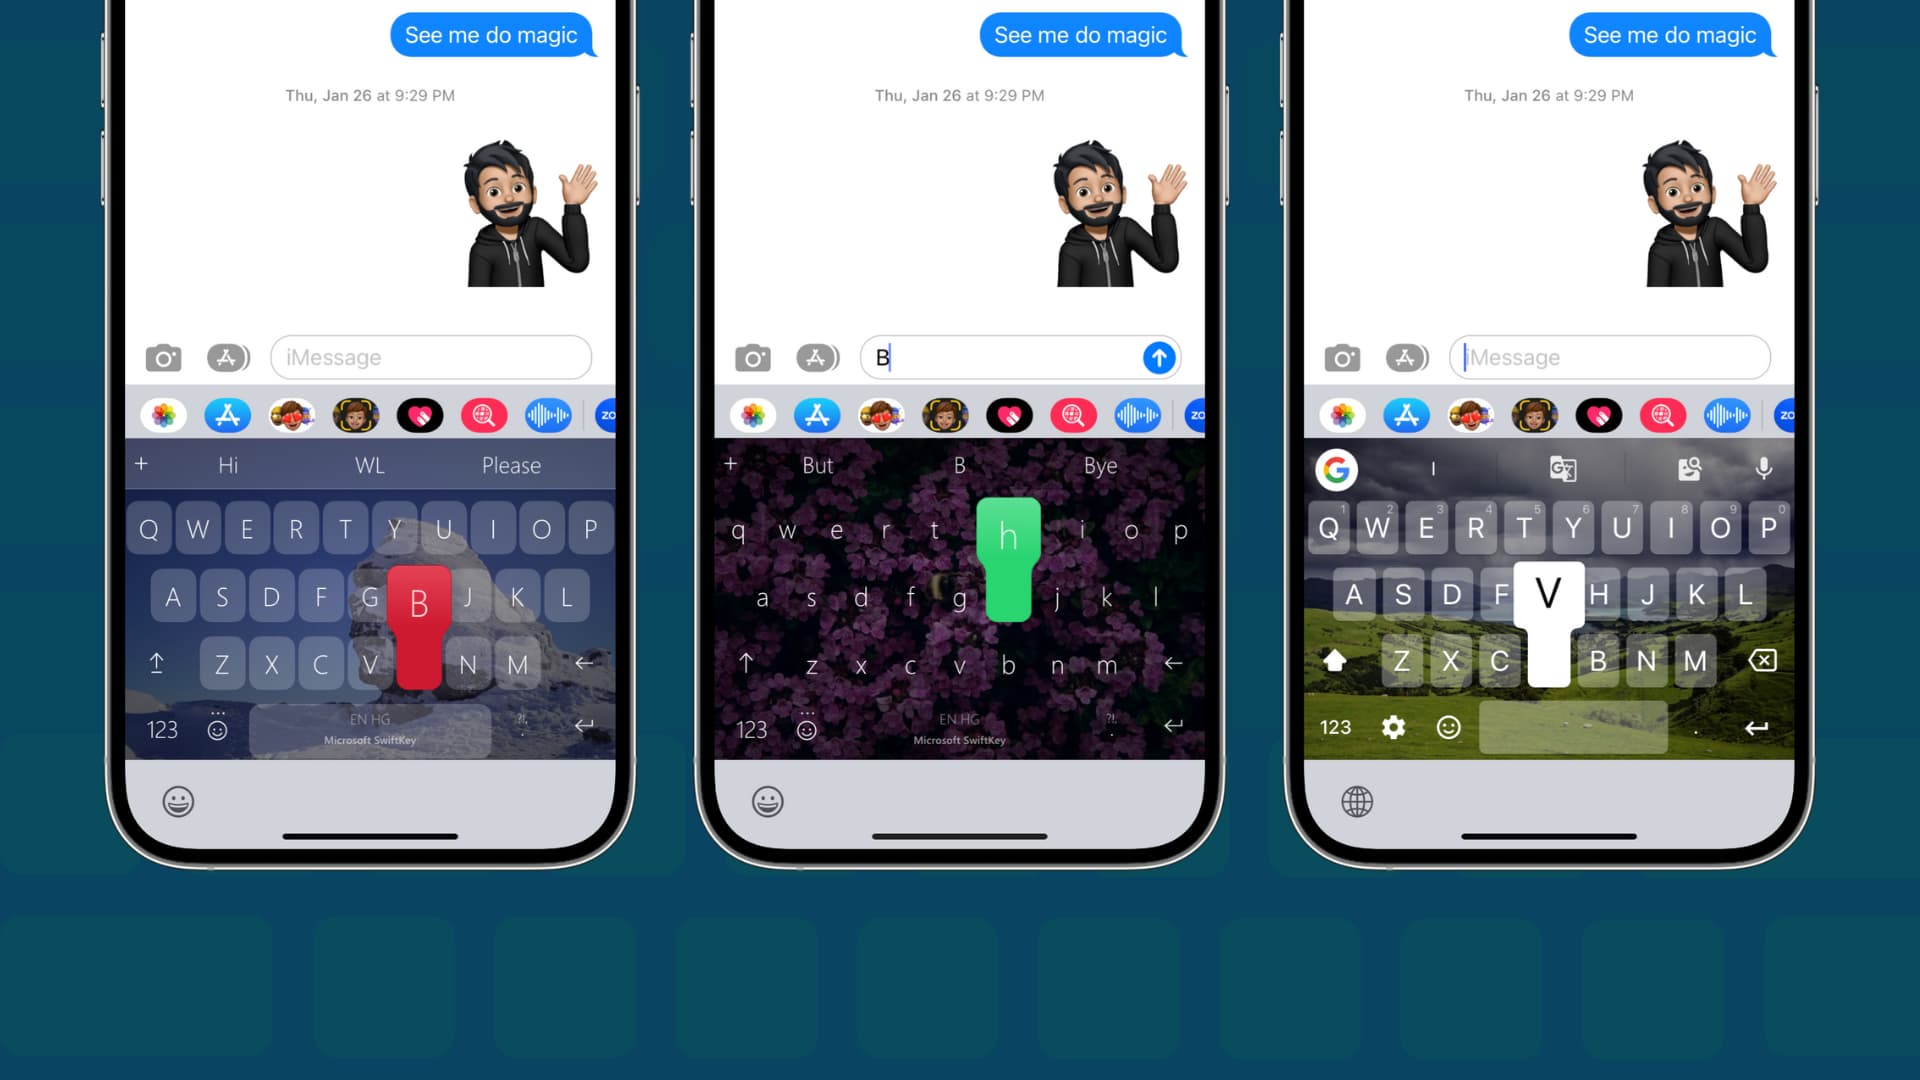 How to set SwiftKey, Gboard, or any third-party app as the default keyboard on iPhone and iPad